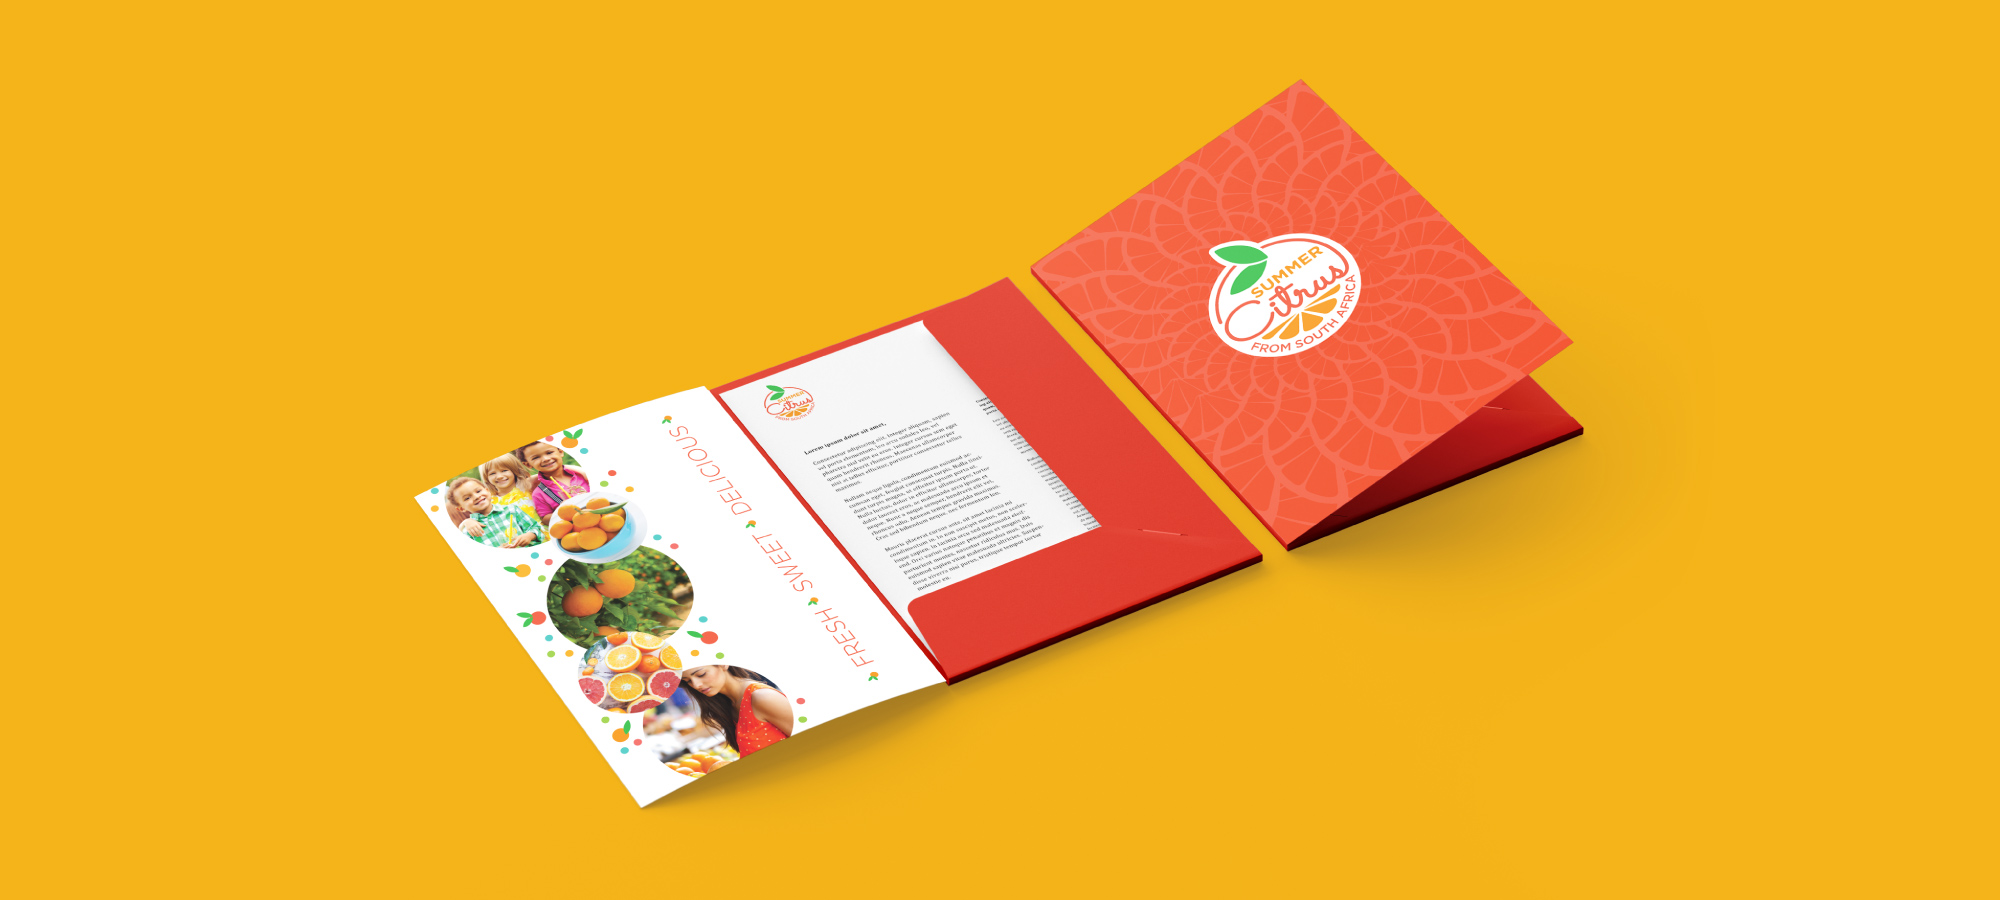 A mock-up of the Sumer Citrus from South Africa design folder and onesheet